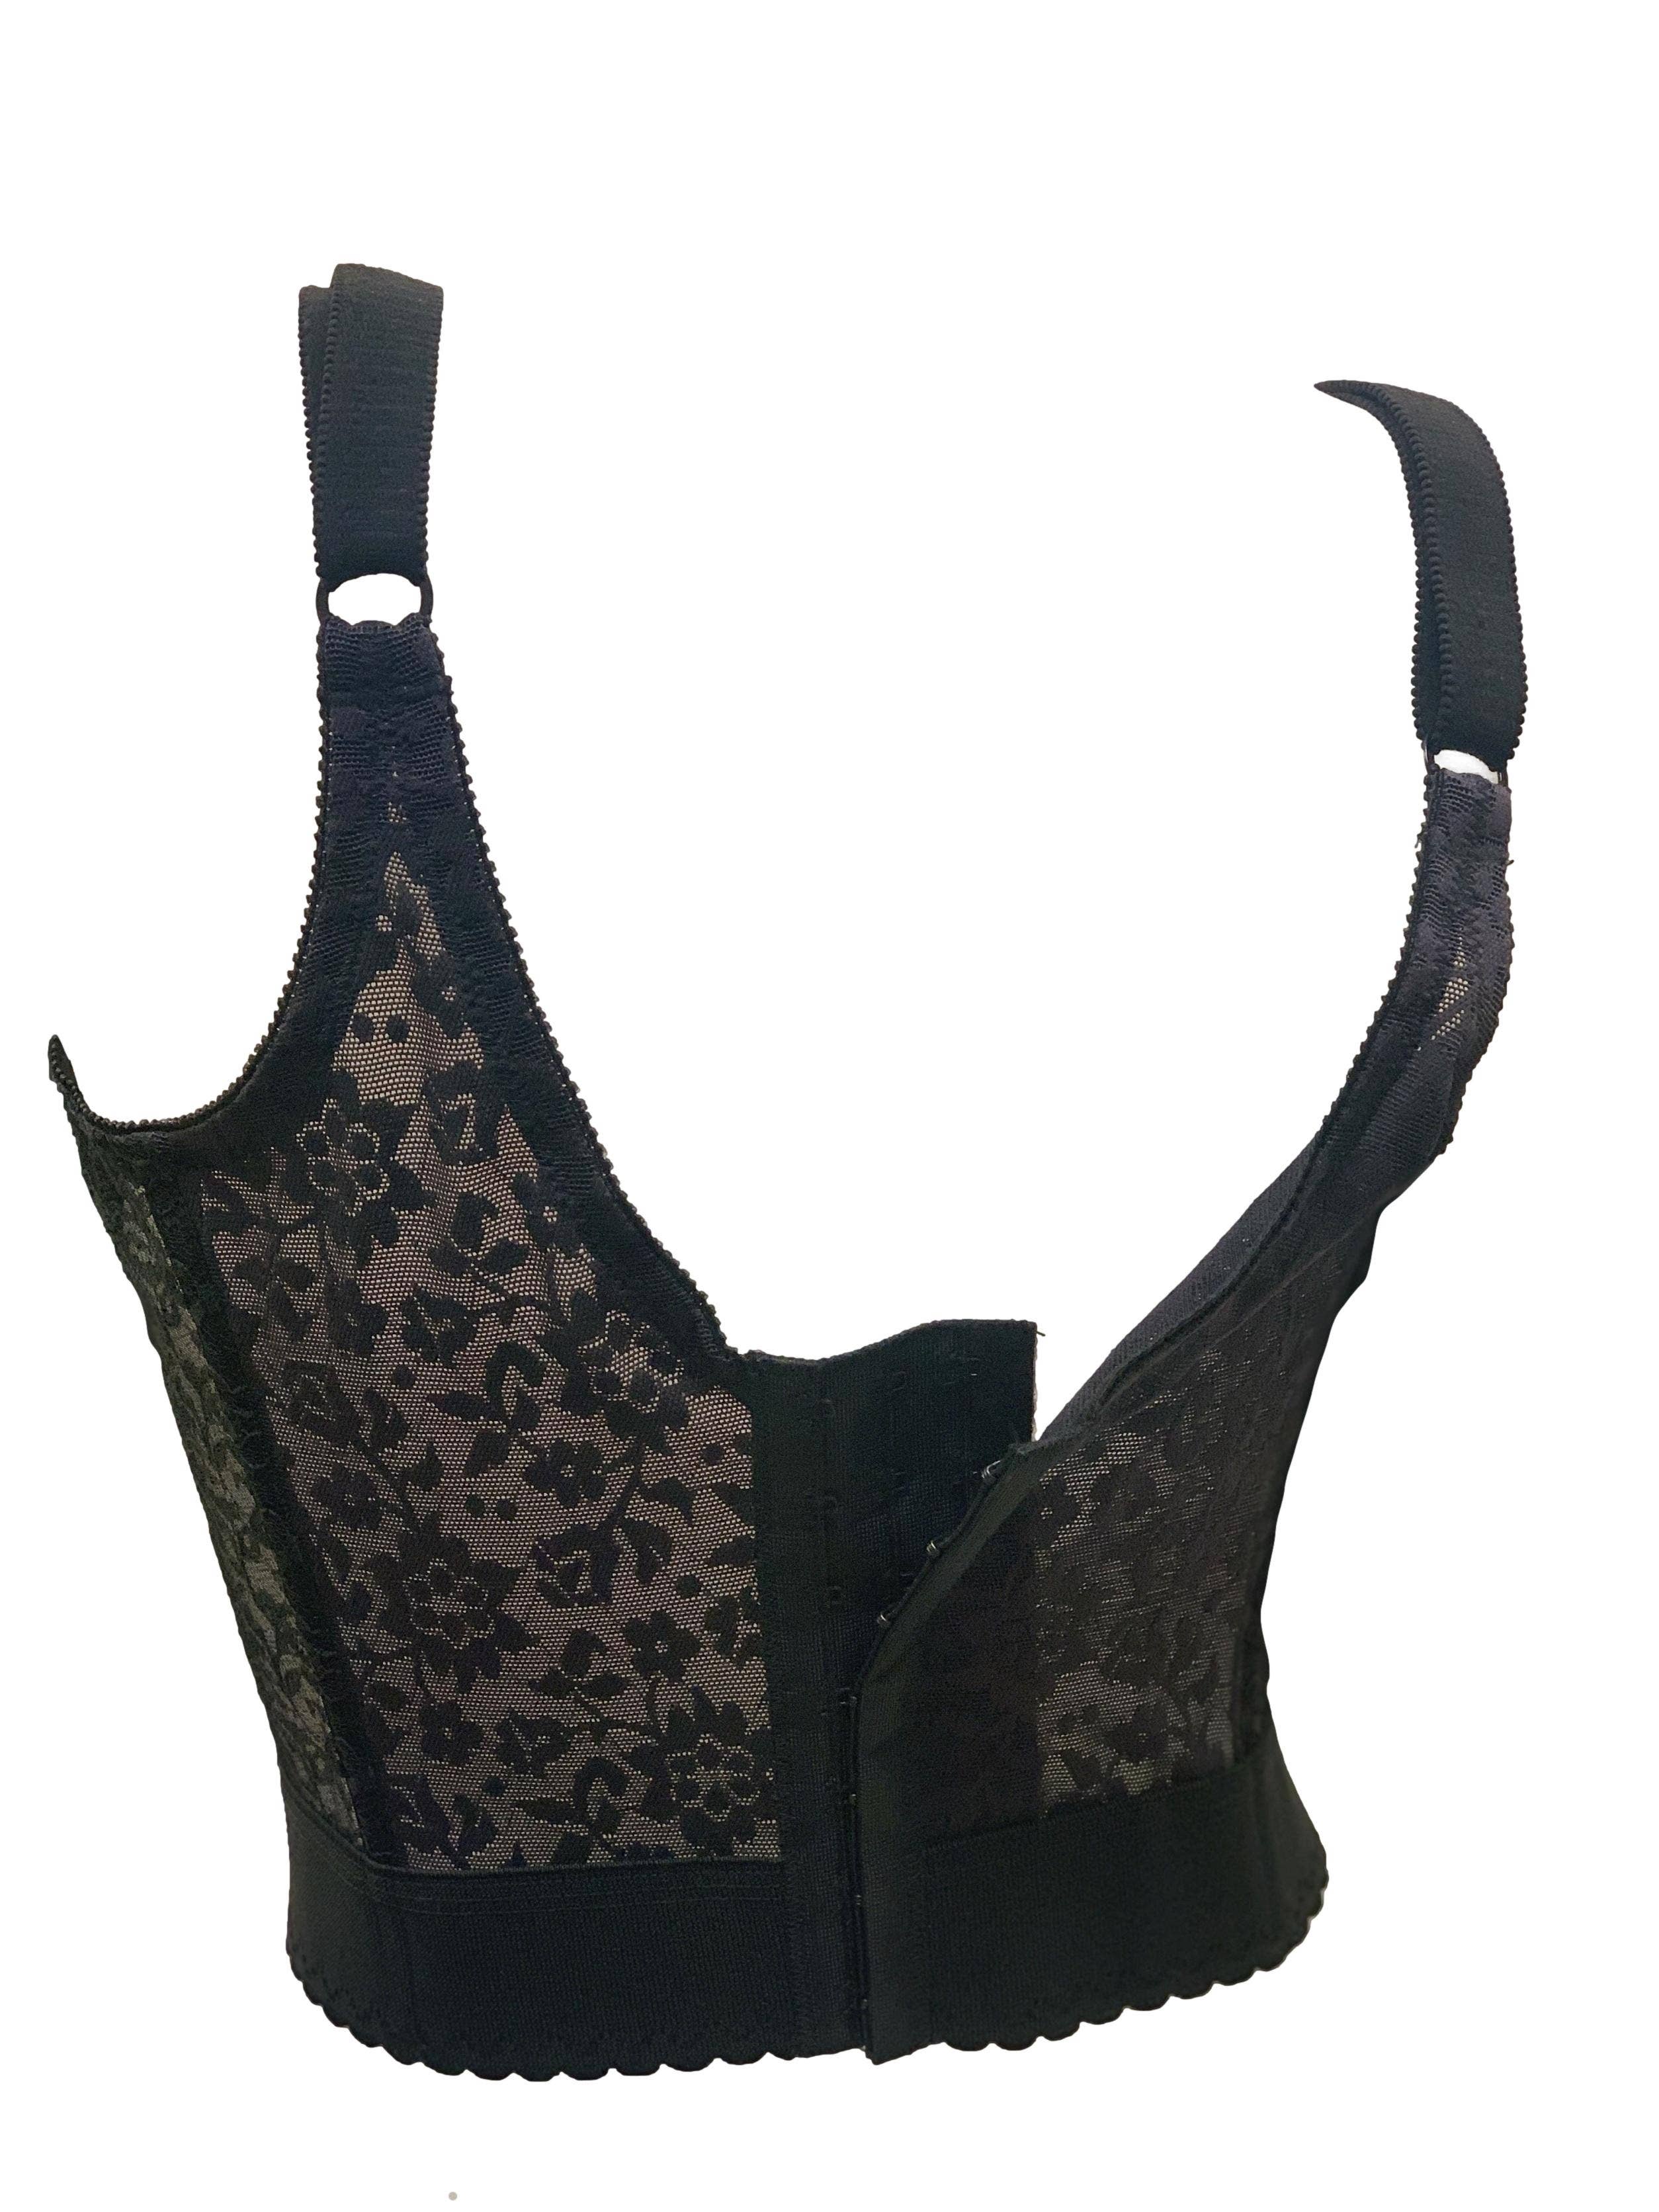 288 Wholesale Mamia Ladies Full Cup Jacquard No Wire Bra -- B Cup